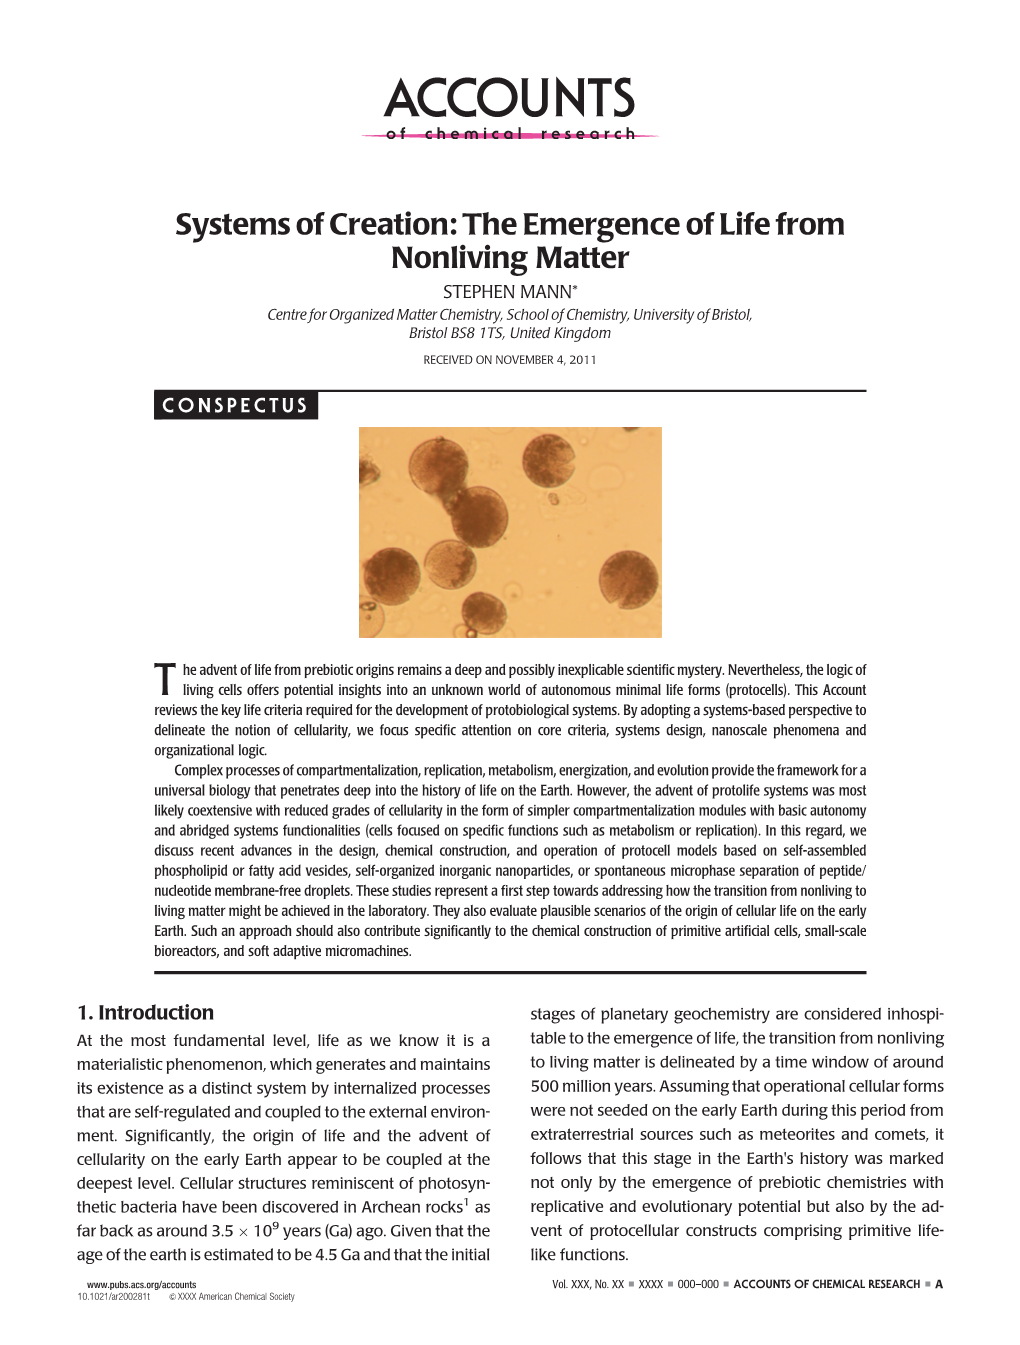 Systems of Creation: the Emergence of Life From